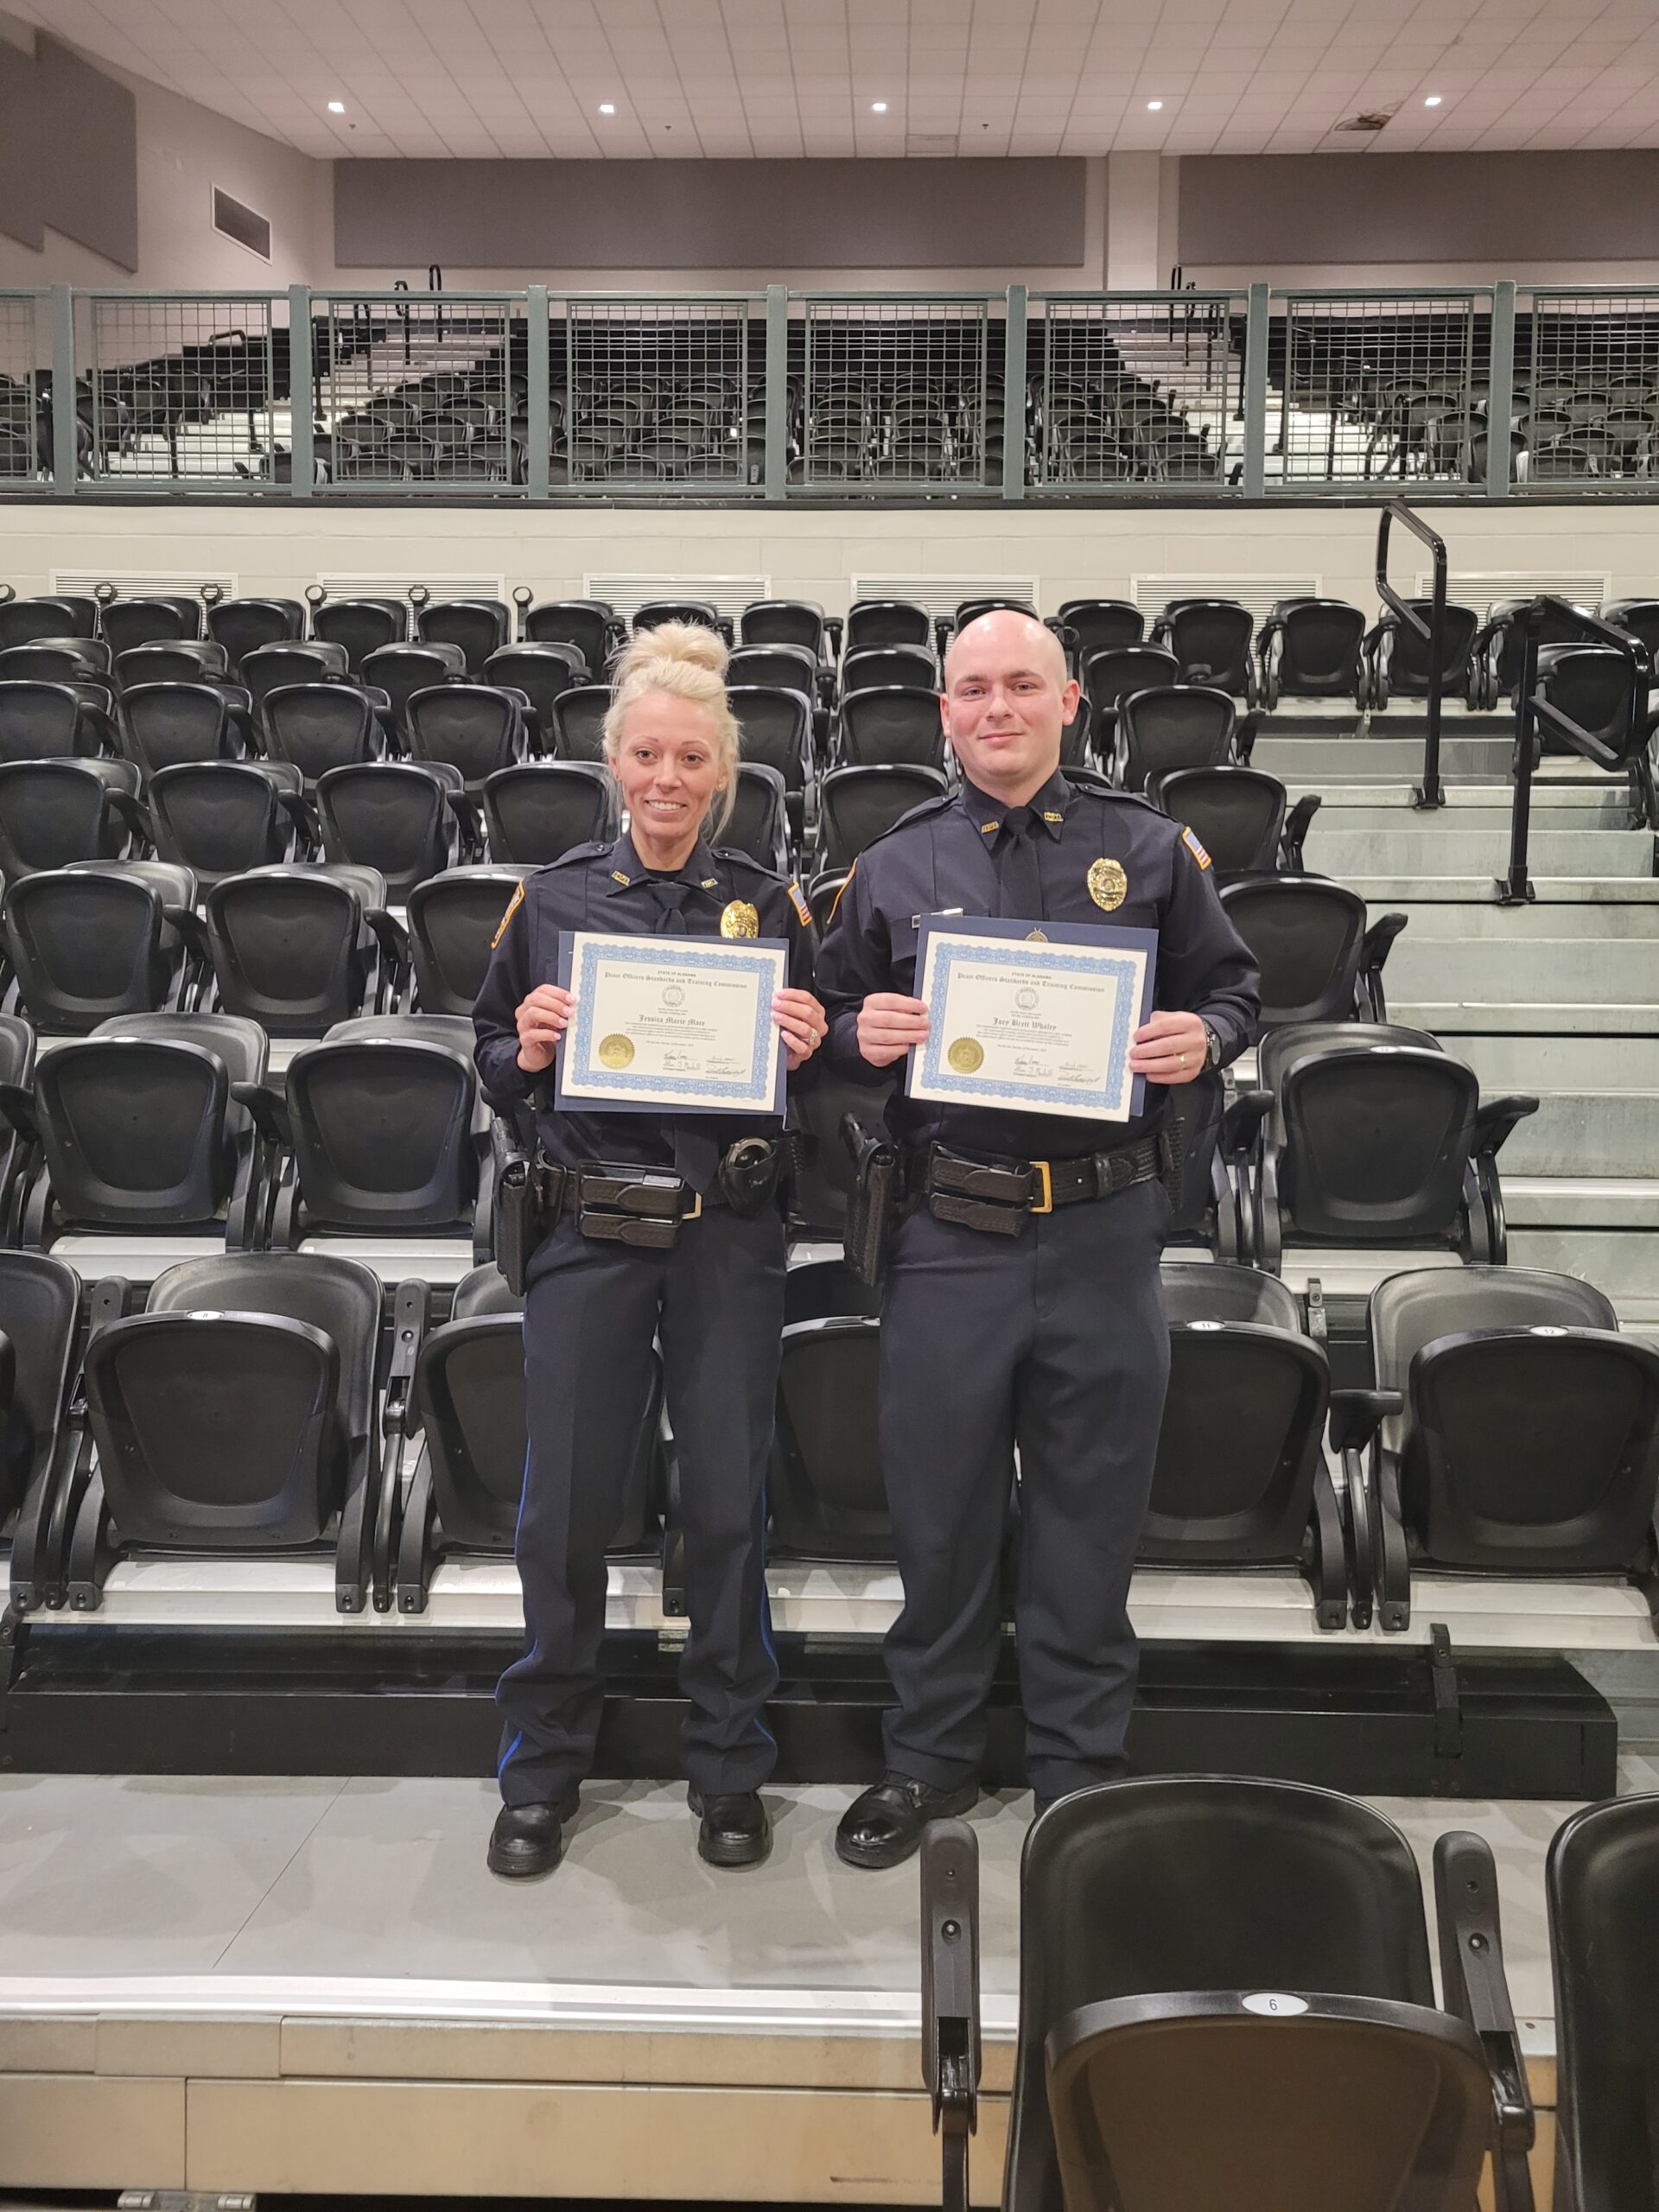 CONGRATULATIONS TO OFFICER JESSICA MACE AND OFFICER JORY WHALEY ON THEIR GRADUATING FROM THE NORTHEAST ALABAMA LAW ENFORCEMENT ACADEMY, DECEMBER 2, 2021.